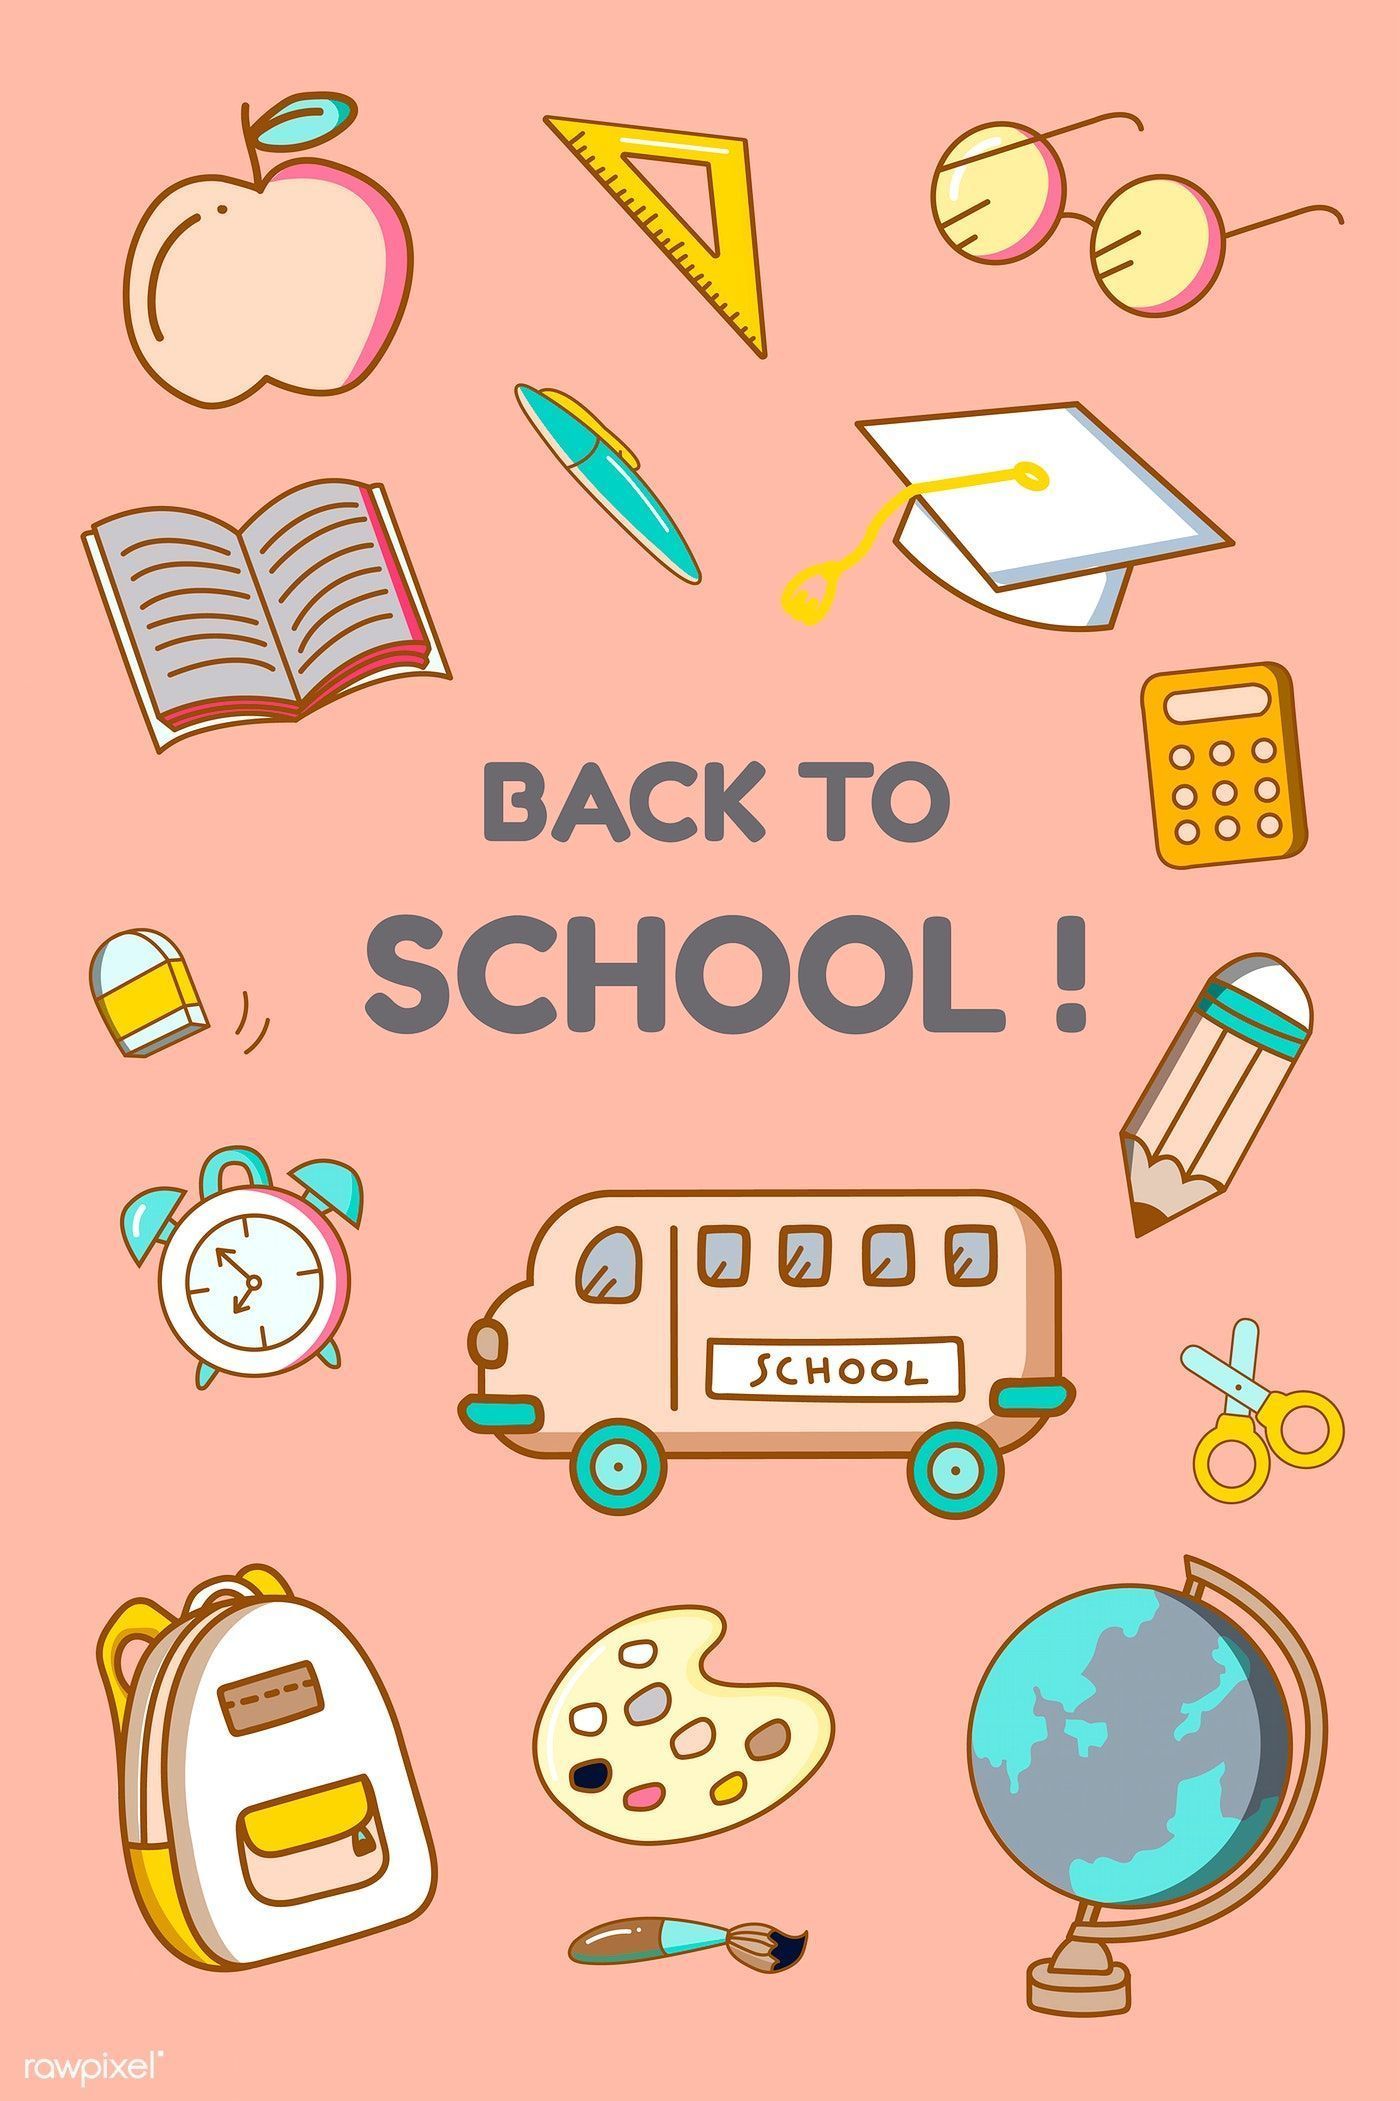 Back to school poster with various objects - School